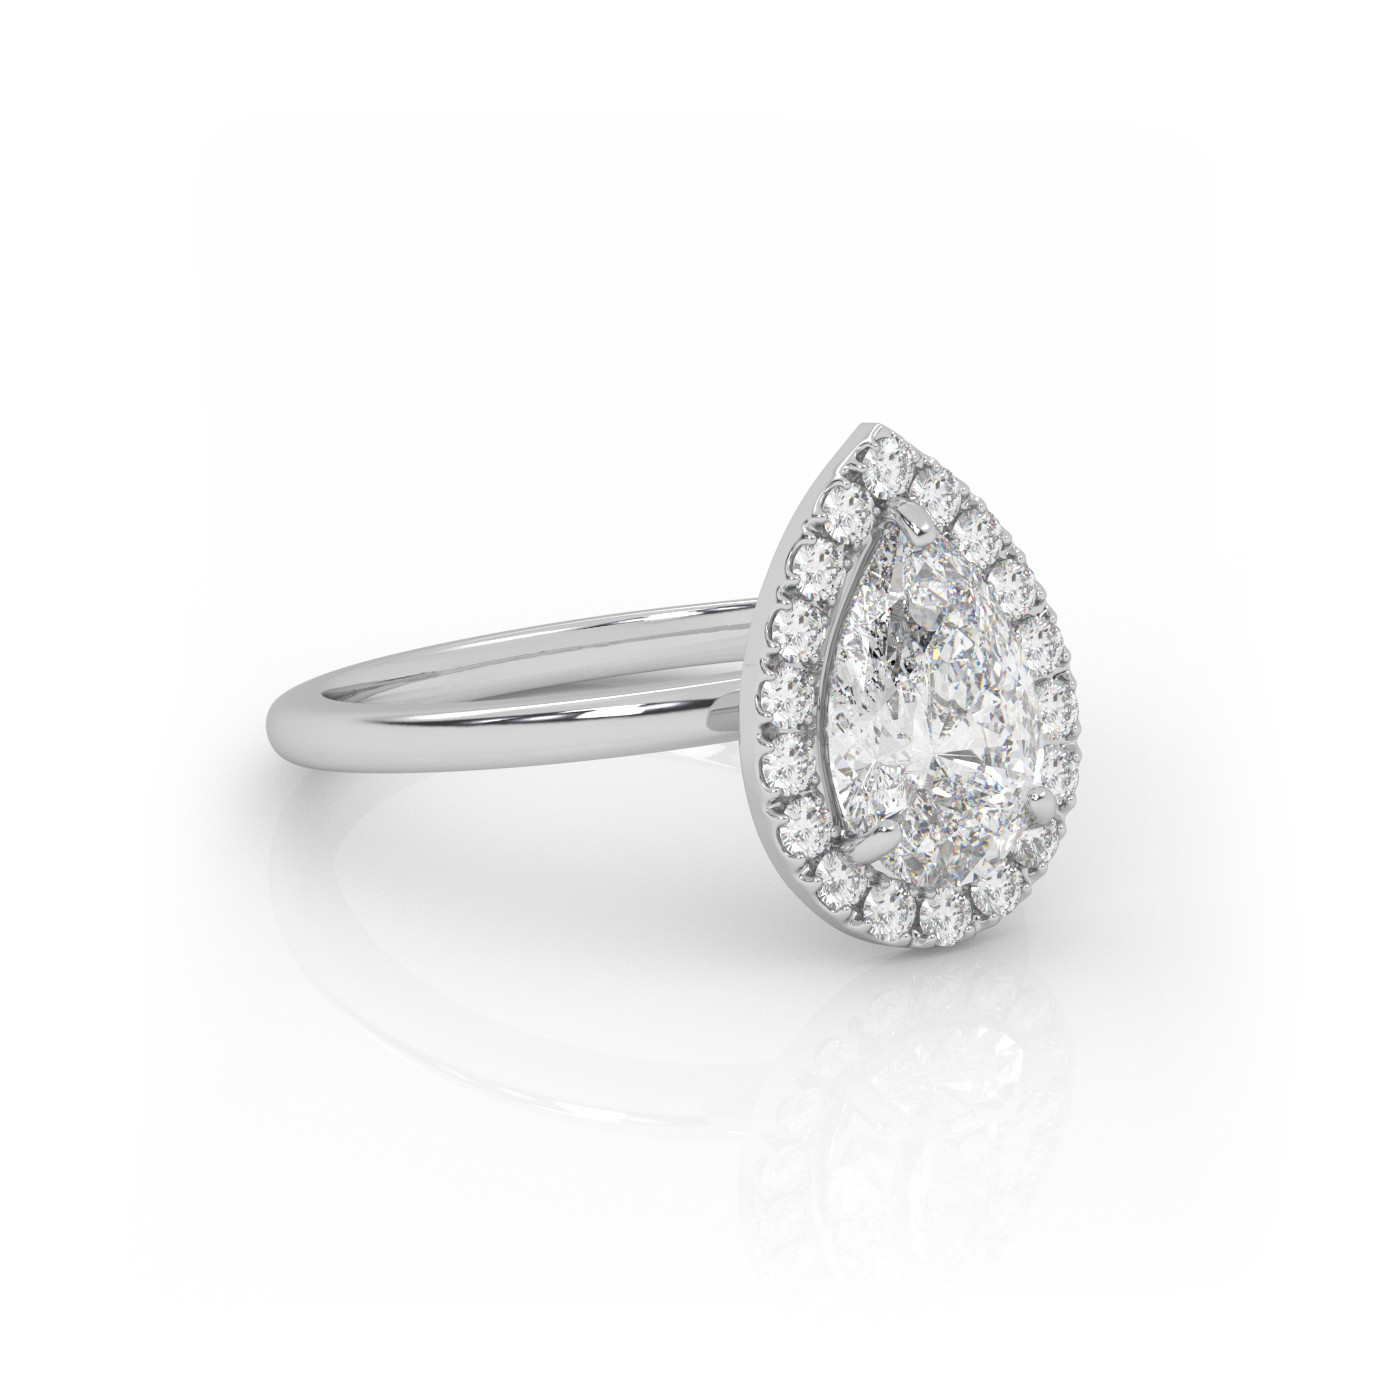 18K WHITE GOLD Pear Diamond Cut Engagement Ring with Halo Style